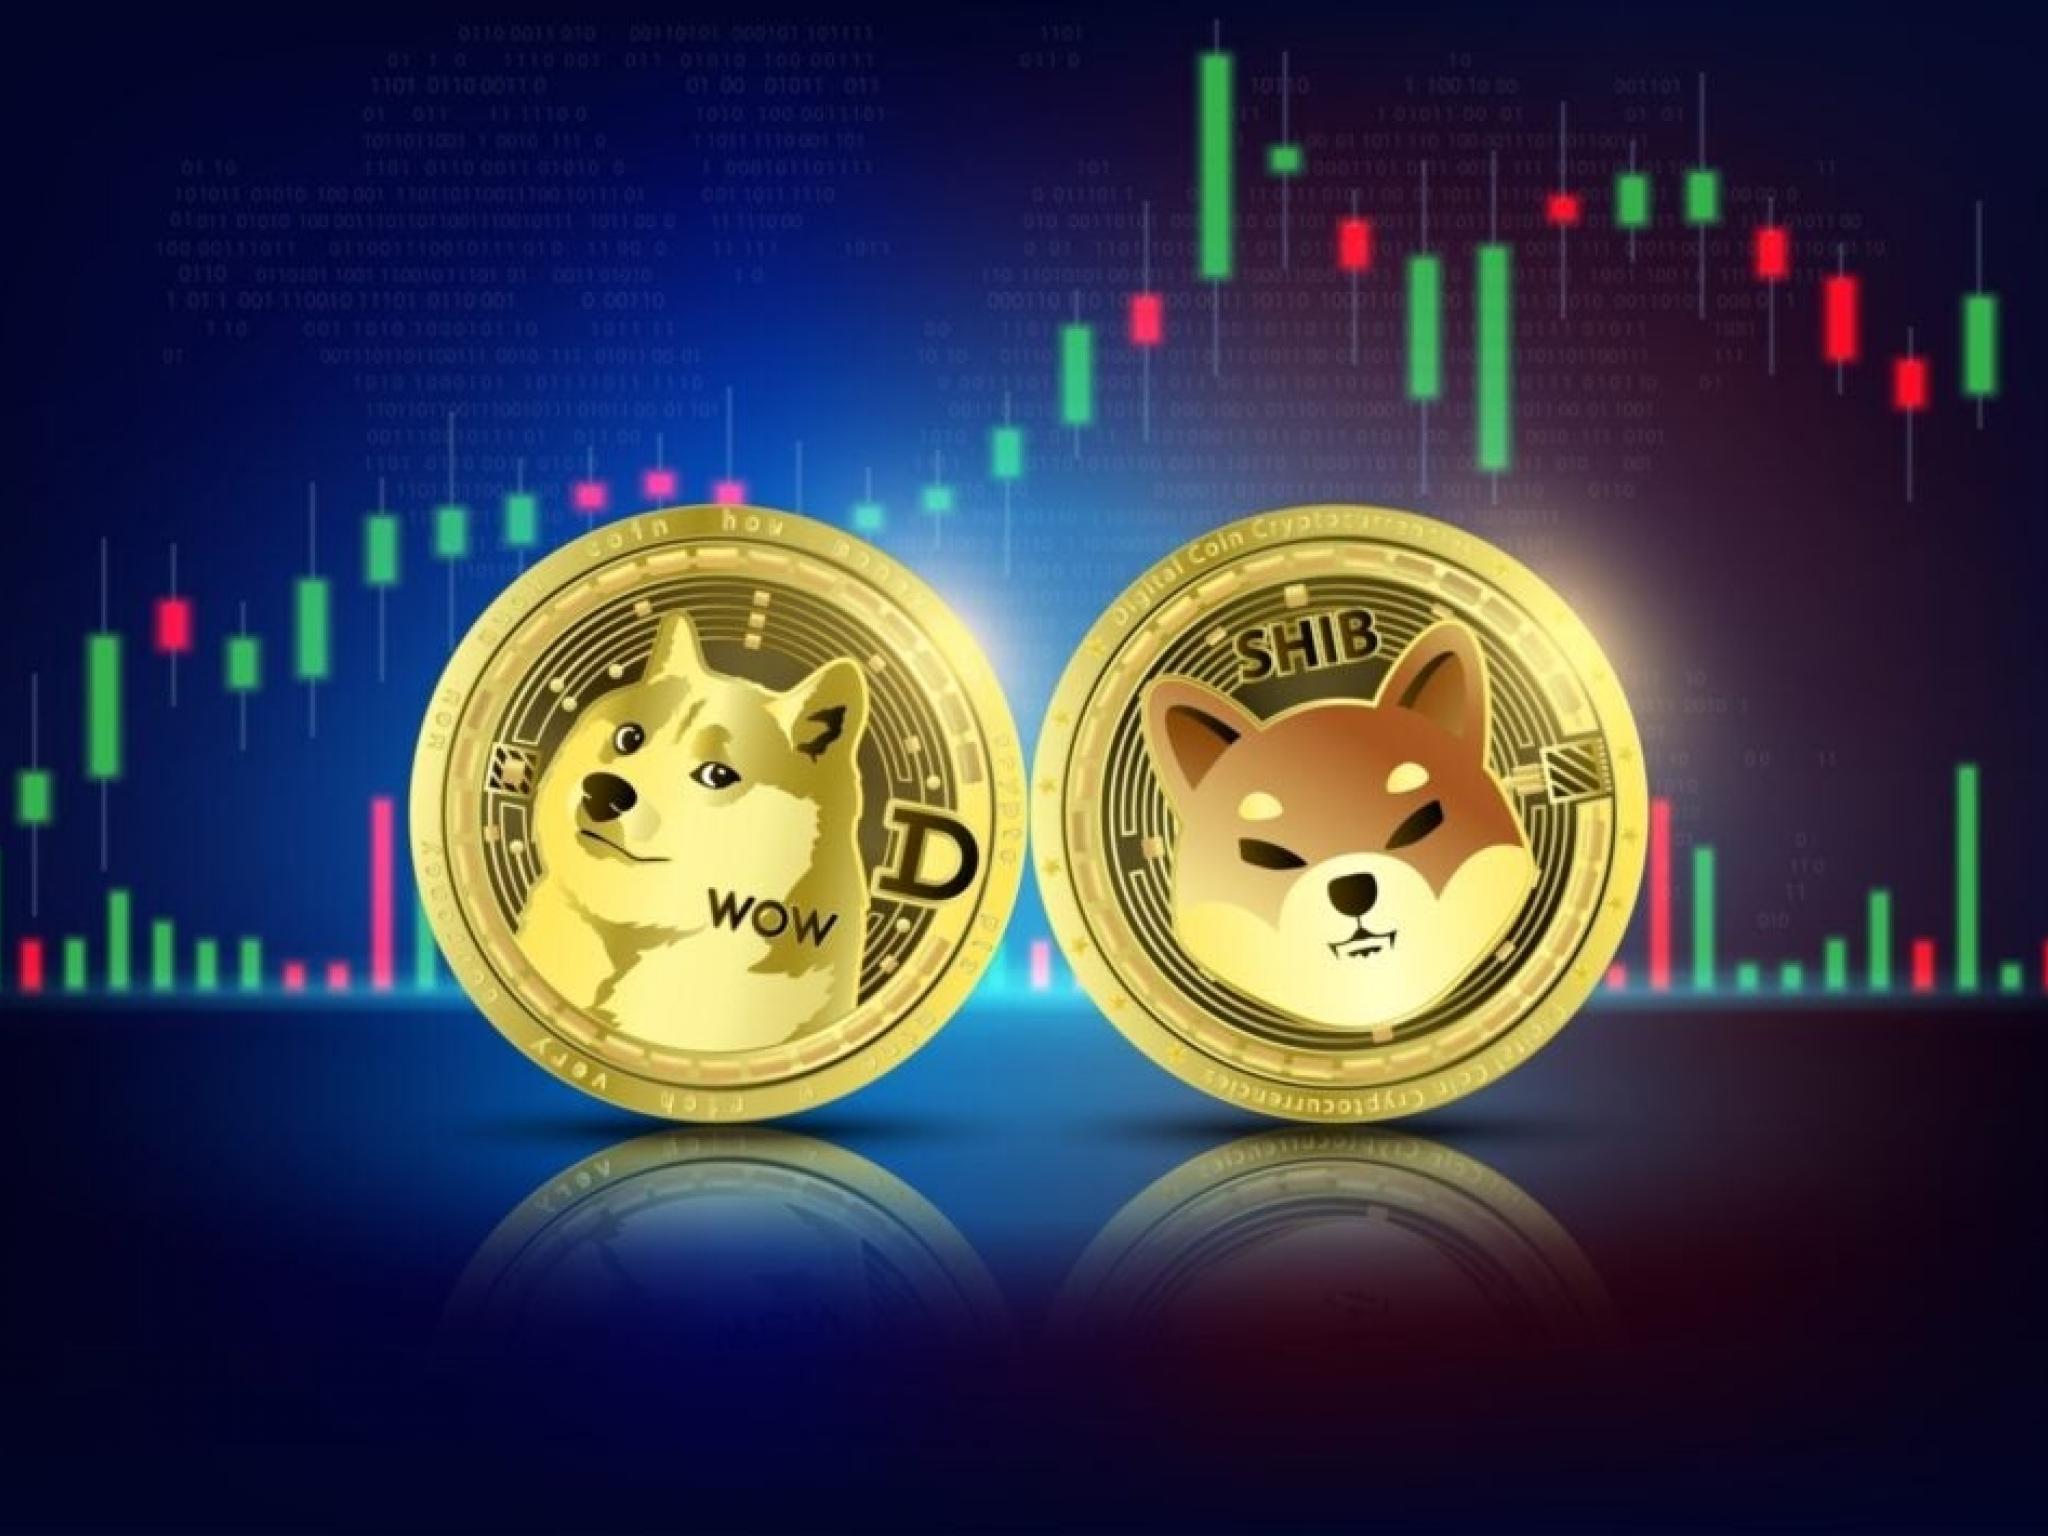  dogecoin-shiba-inu-and-who-else-how-meme-coins-have-evolved-since-the-last-bitcoin-halving 